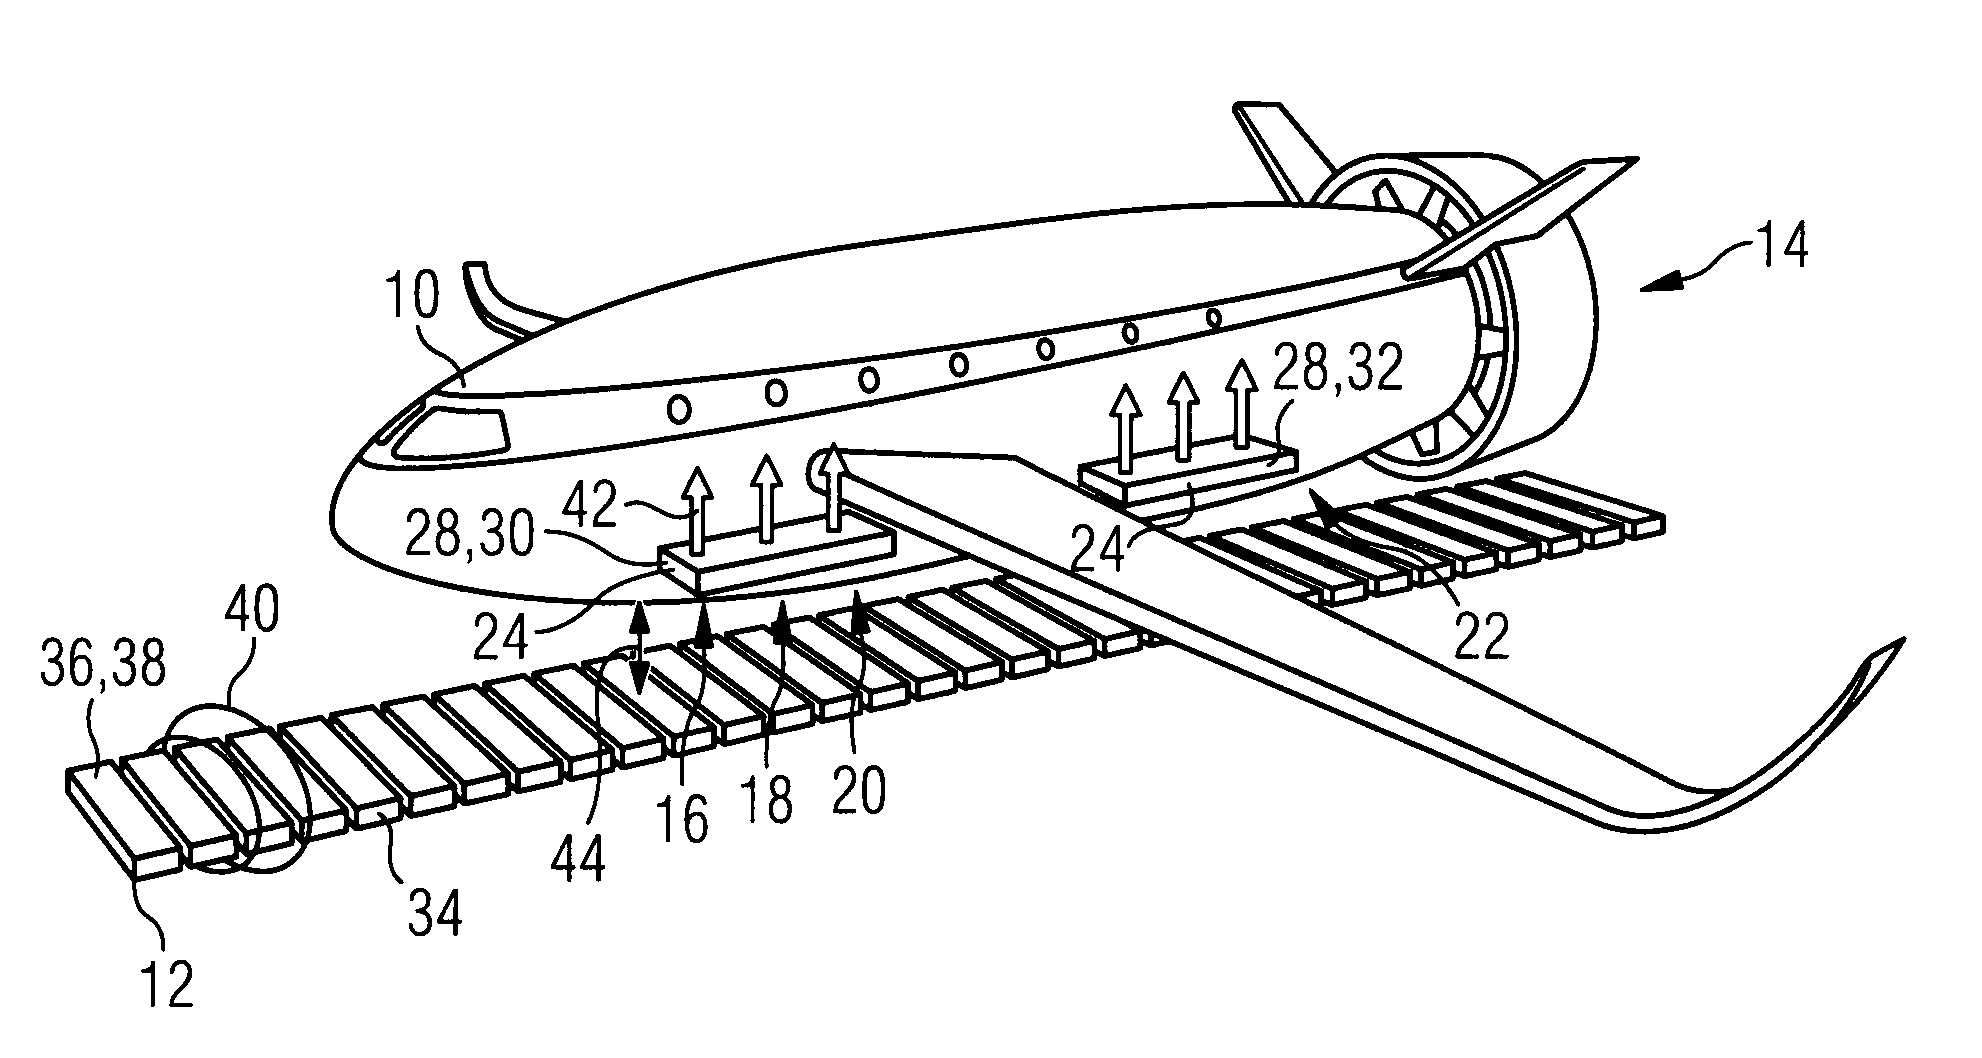 Air Vehicle and Levitation System for Air Vehicle